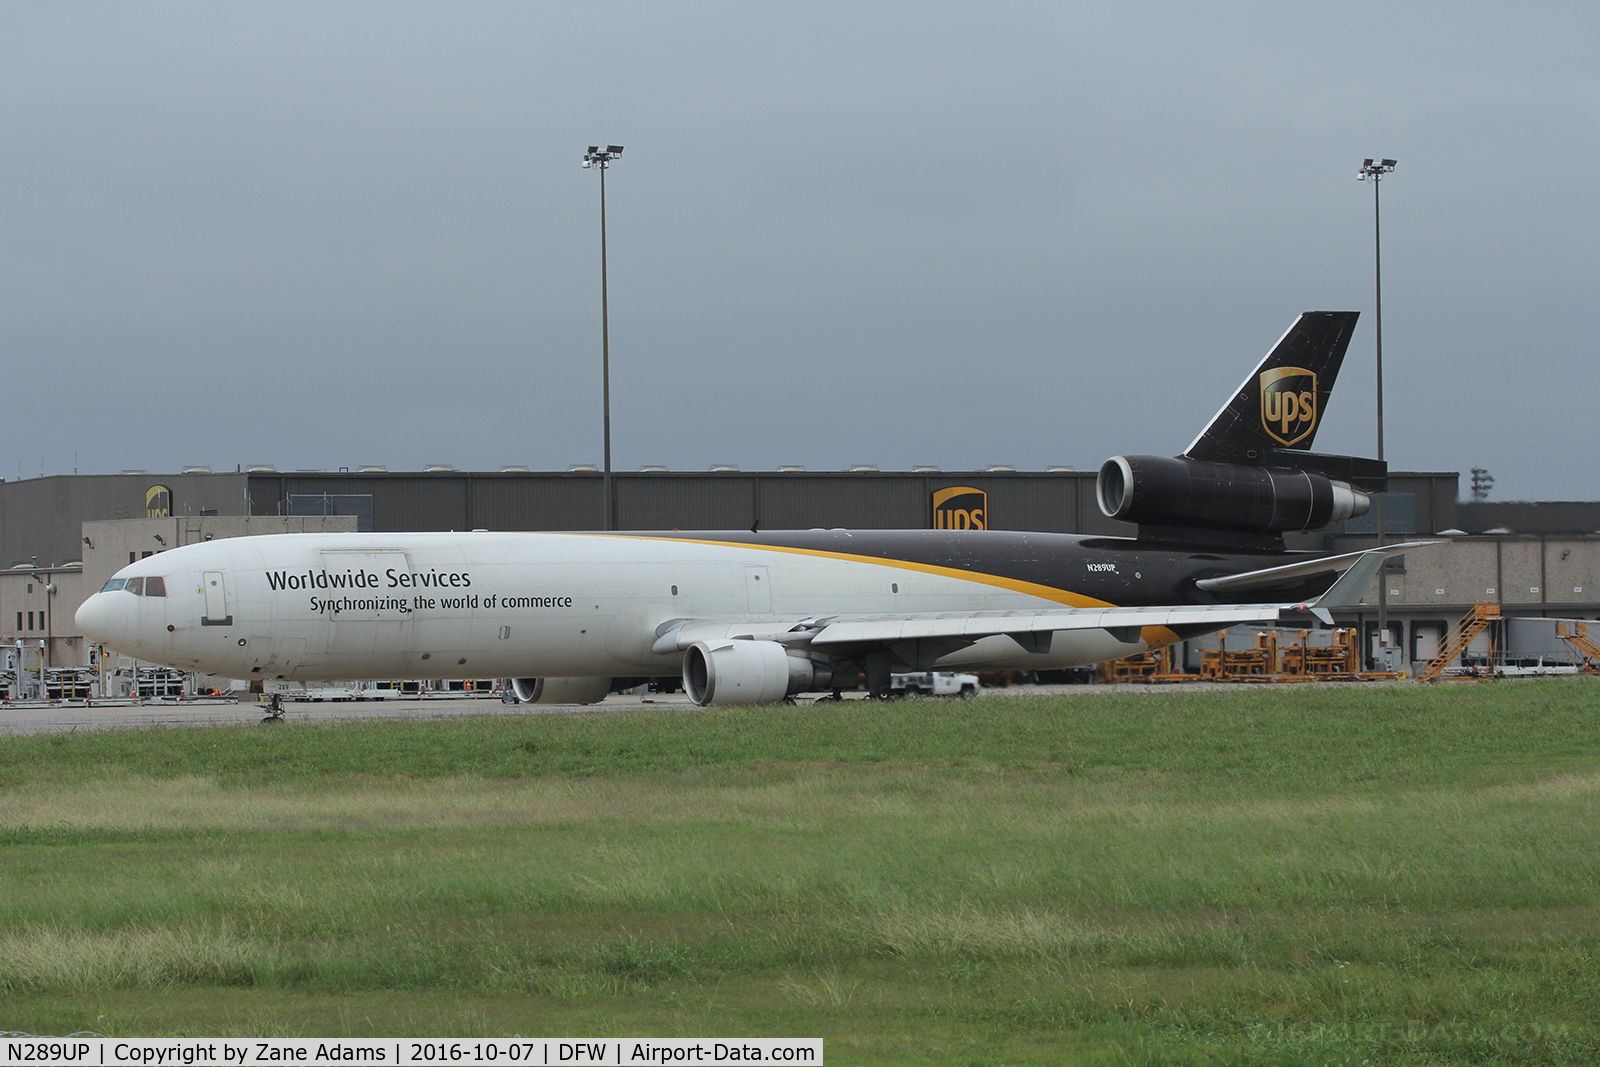 N289UP, 1992 McDonnell Douglas MD-11F C/N 48455, On the UPS ramp at DFW Airport